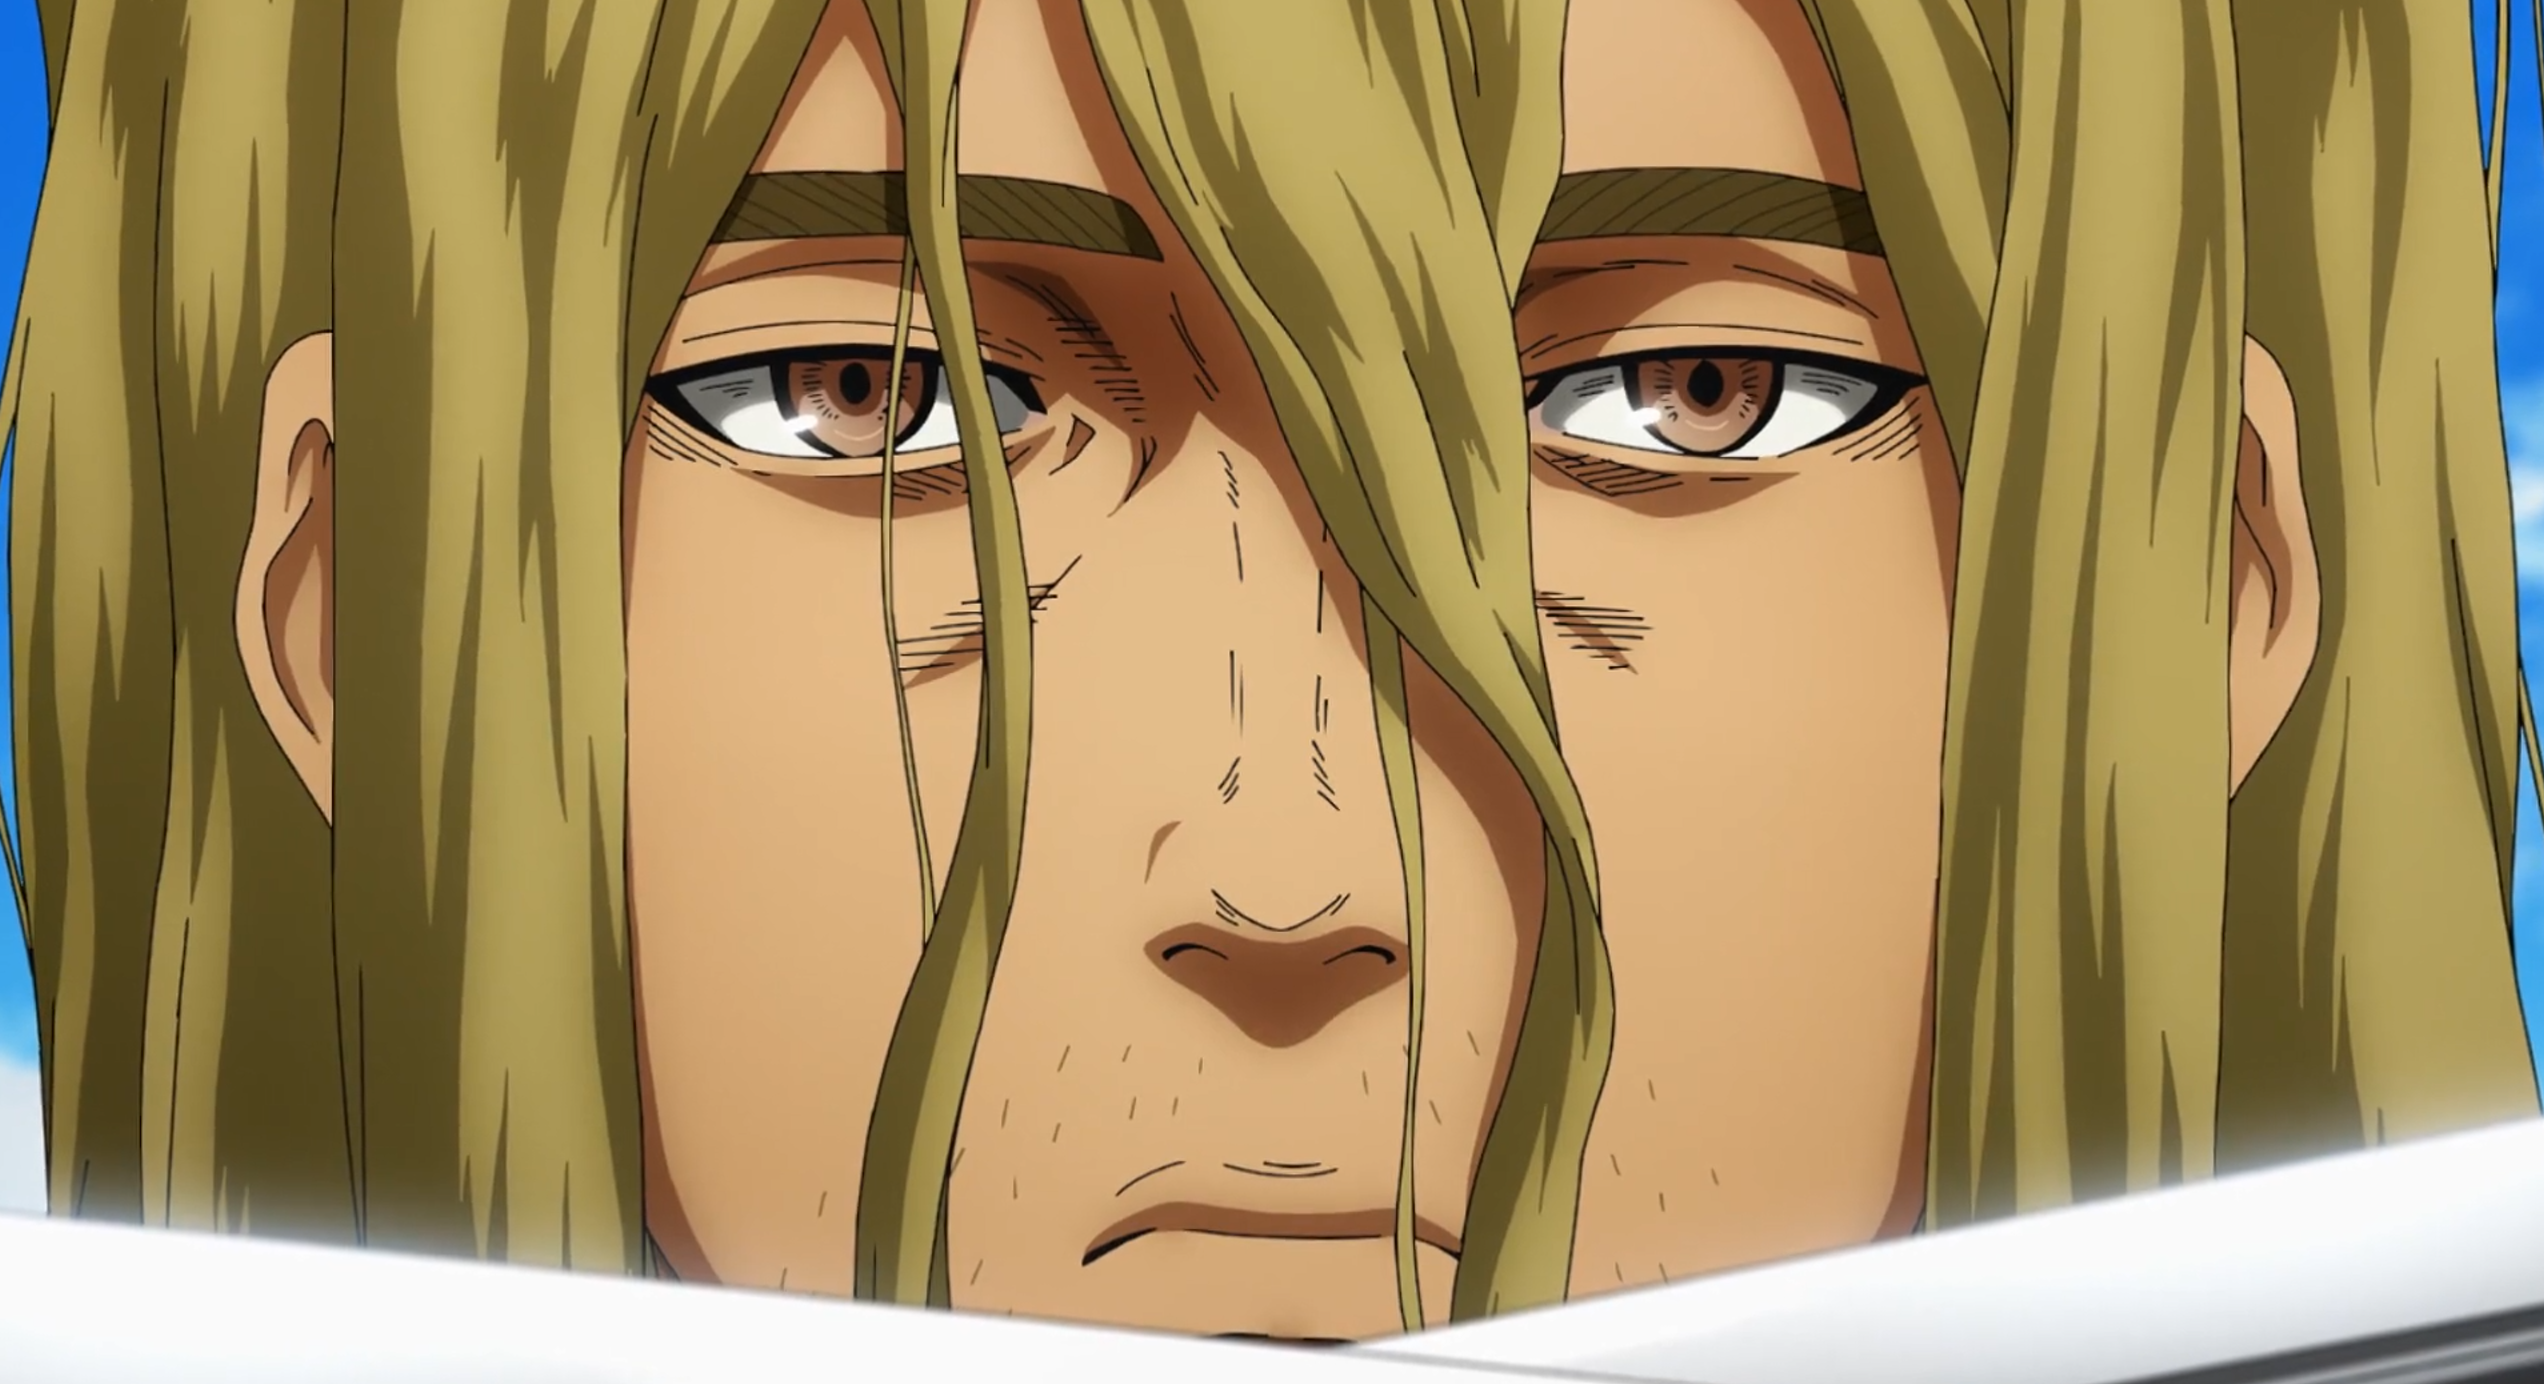 Vinland Saga Season 2, Episode 3: Does anything good come from living?